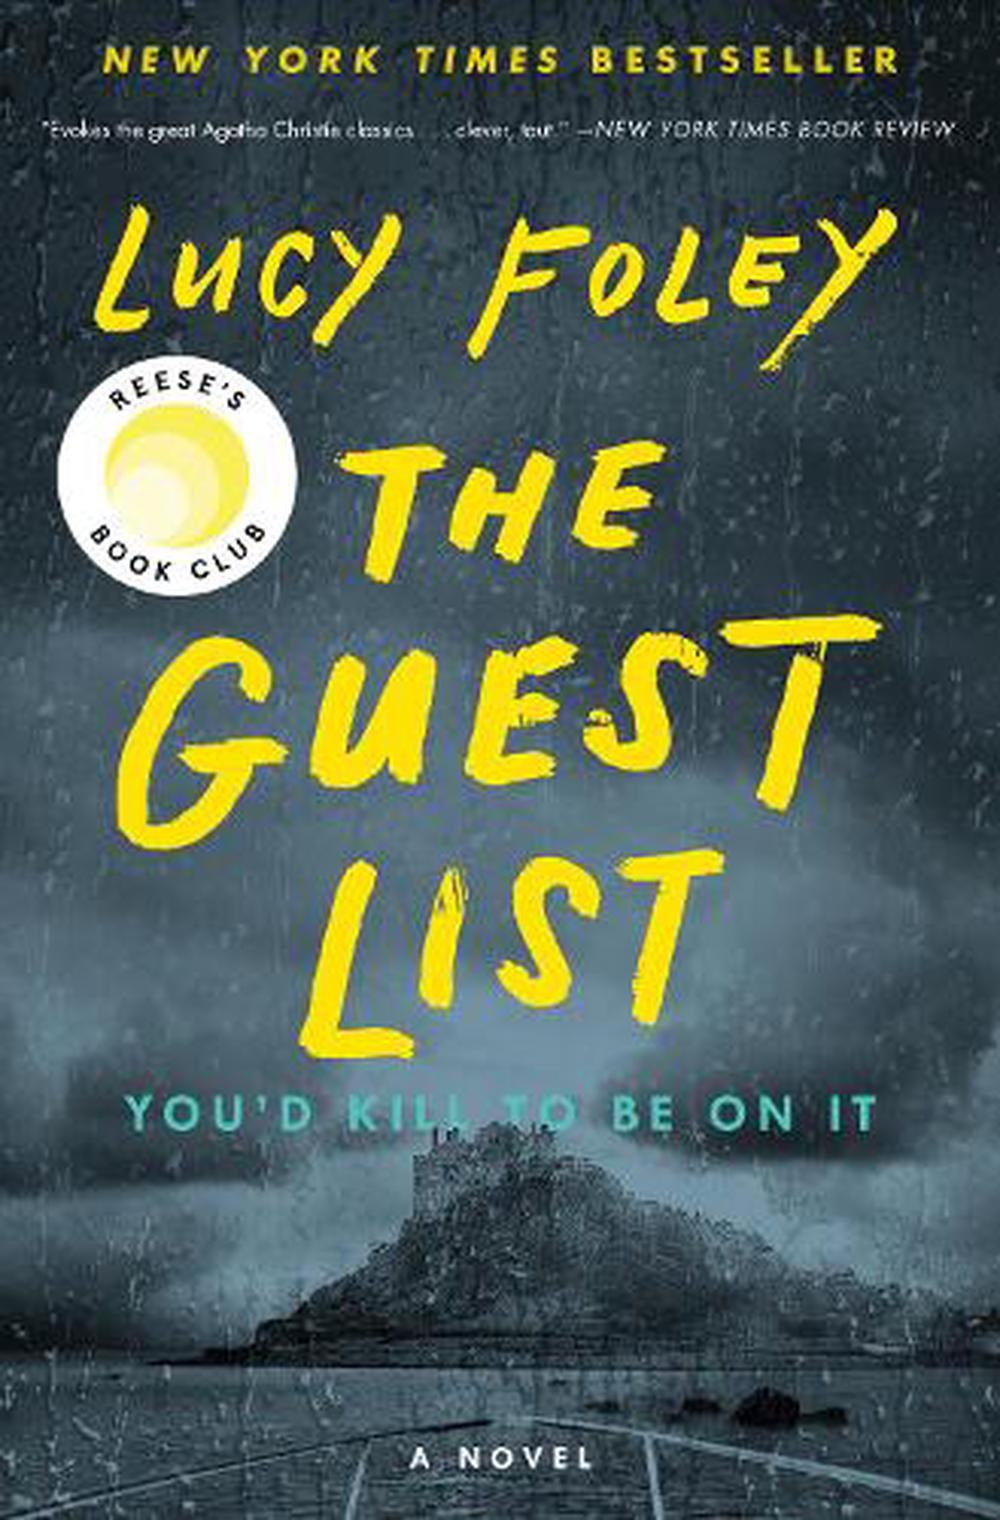 The Guest List A Novel by Lucy Foley (English) Hardcover Book Free